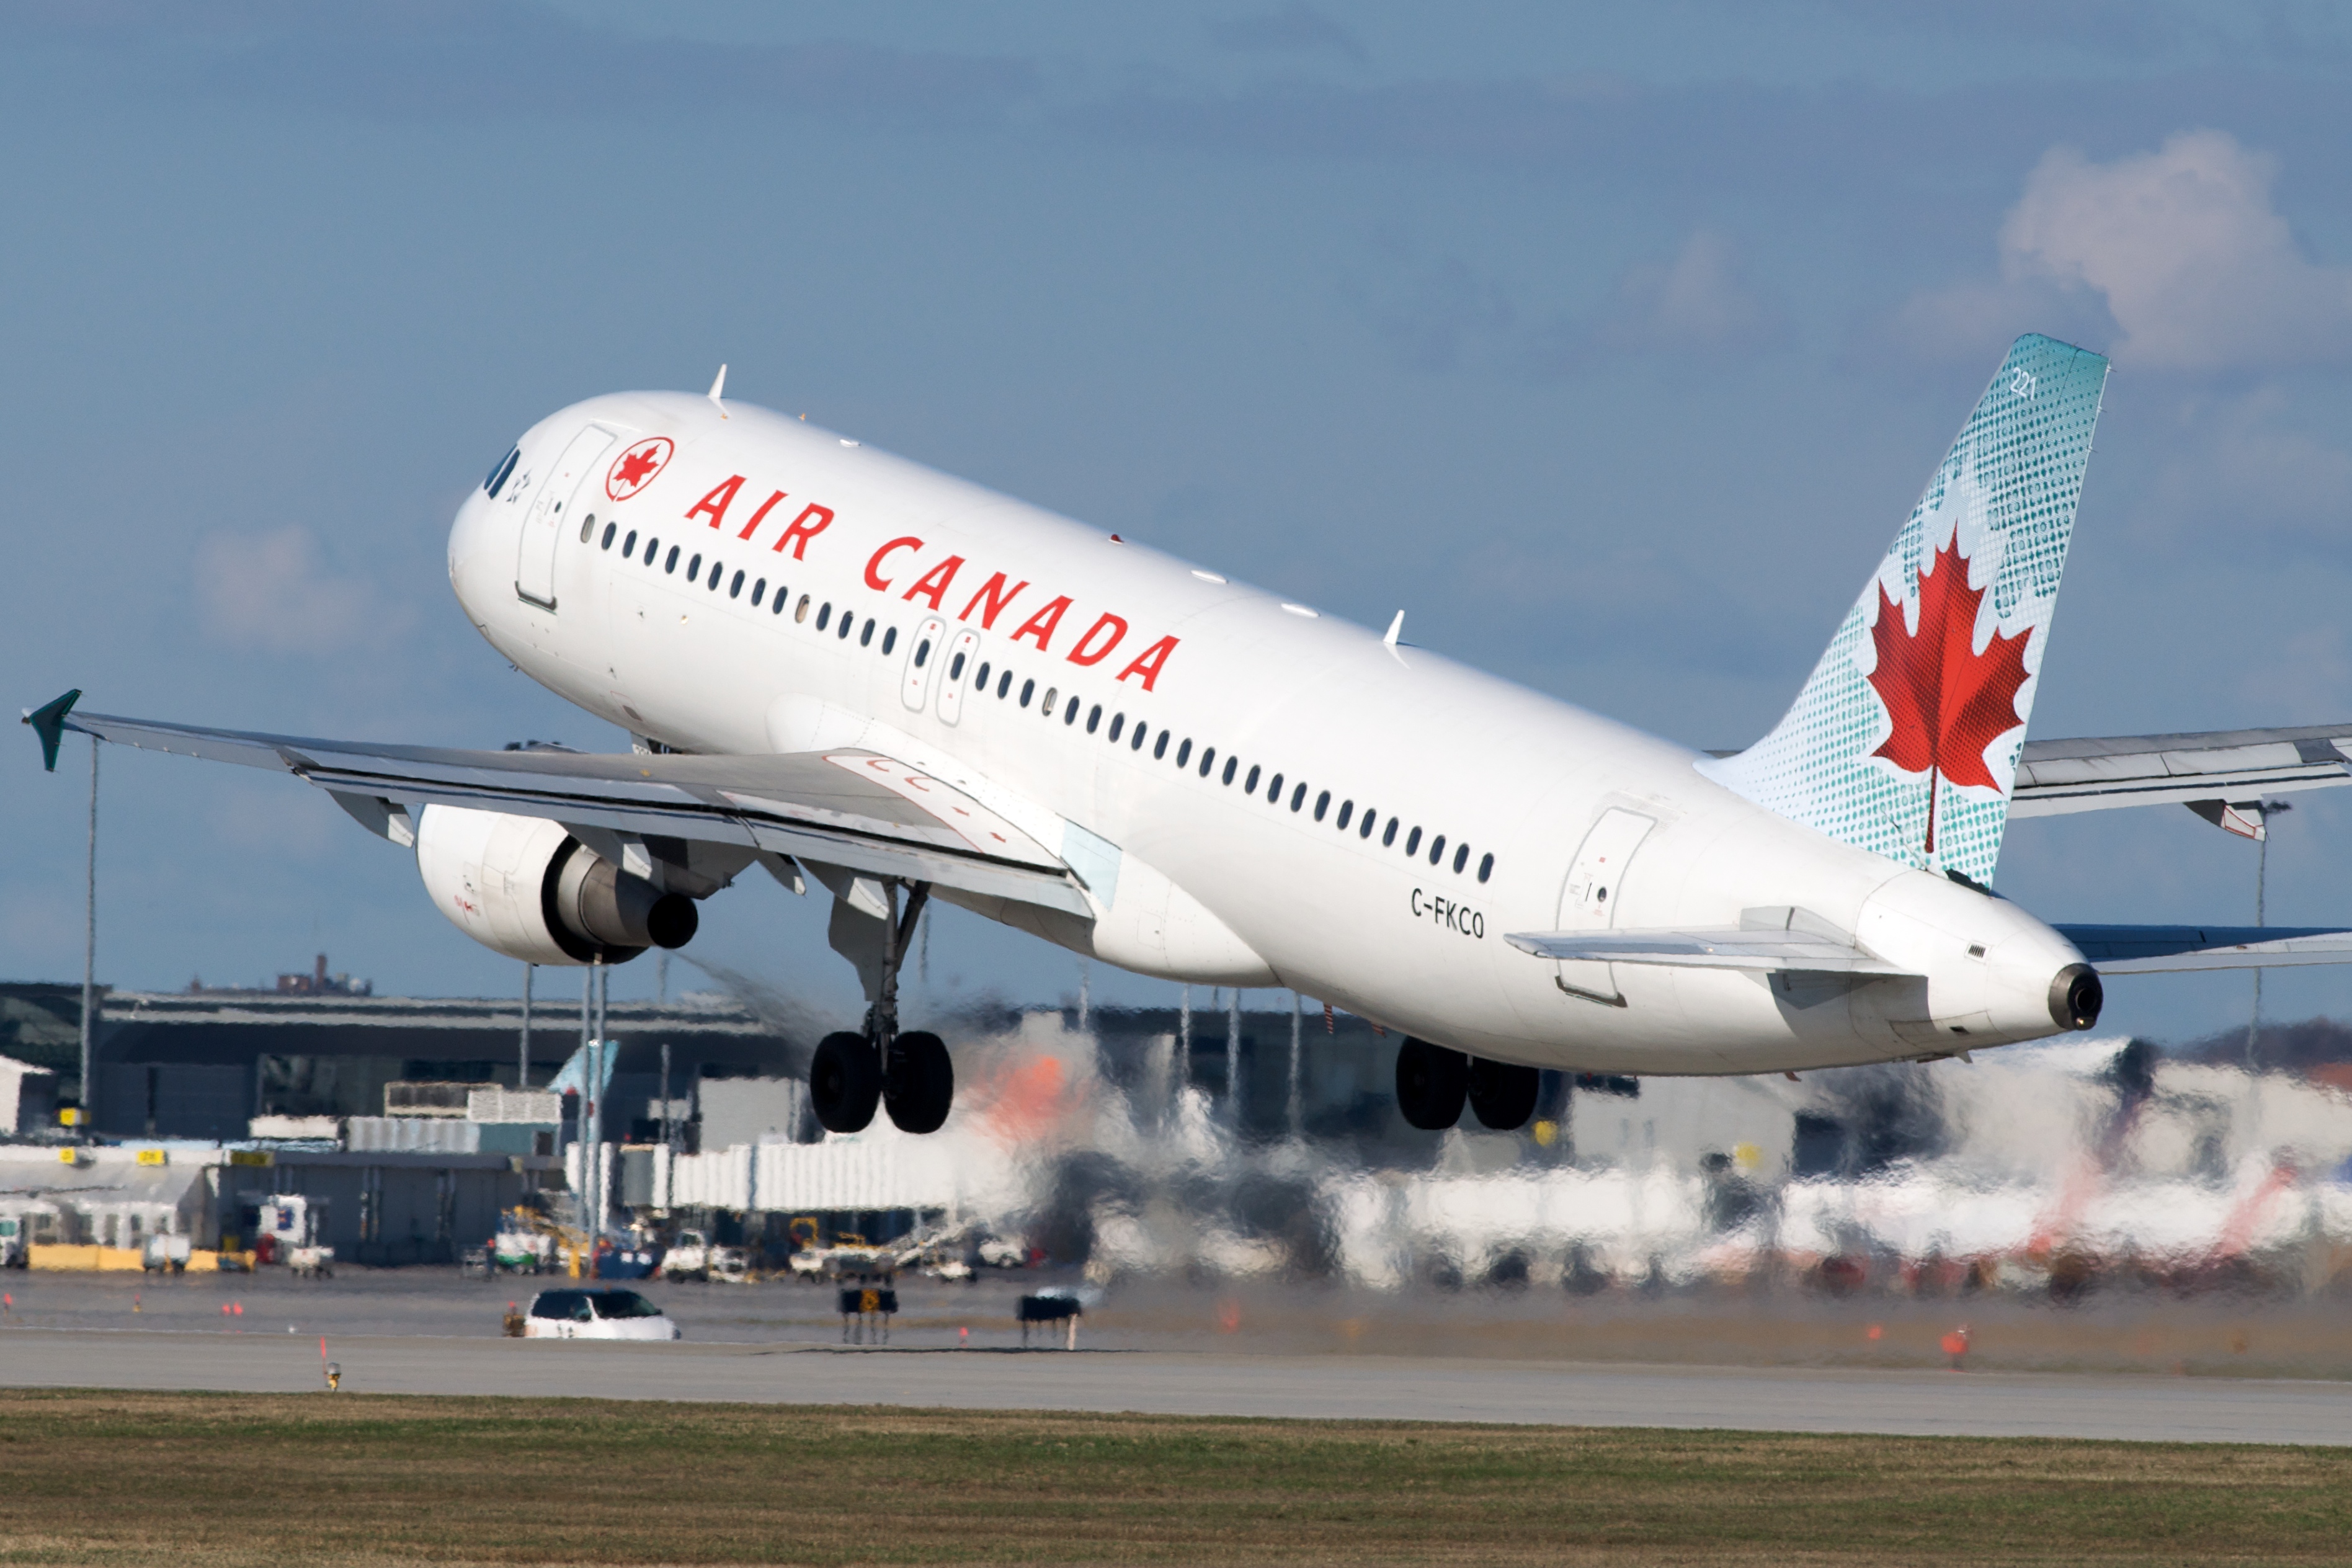 UPDATE 1-Air Canada flight diverted to Hawaii after turbulence, minor injuries reported